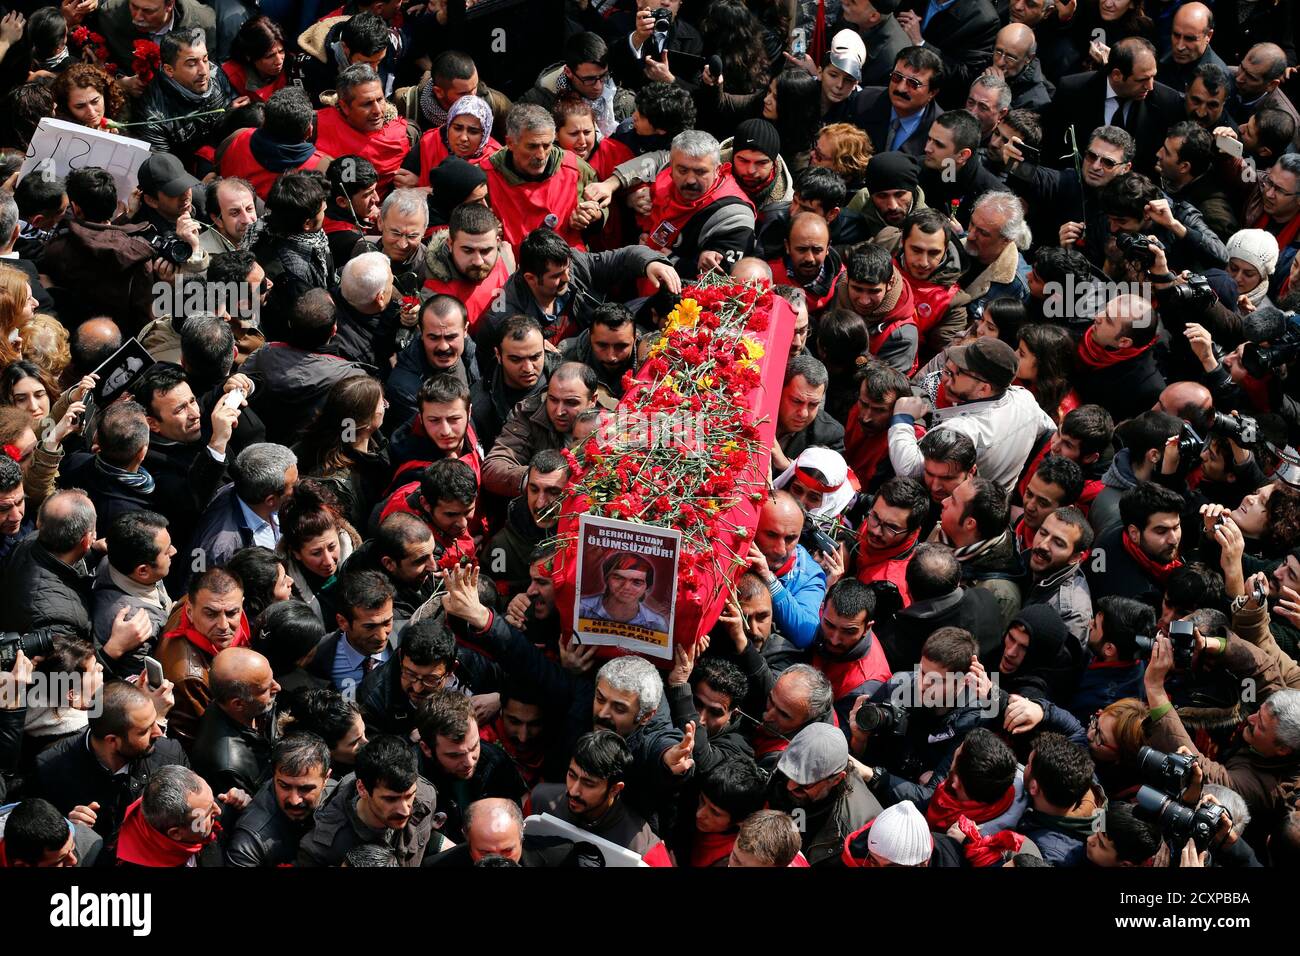 Mourners carry the coffin of Berkin Elvan during funeral ceremony in Okmeydani cemevi, an Alevi place of worship, in Istanbul March 12, 2014. Several thousand mourners gathered in central Istanbul on Wednesday for the funeral of Elvan, a 15-year-old boy wounded during anti-government demonstrations last summer whose death on Tuesday triggered protests across Turkey. REUTERS/Murad Sezer (TURKEY  - Tags: POLITICS CIVIL UNREST TPX IMAGES OF THE DAY) Stock Photo